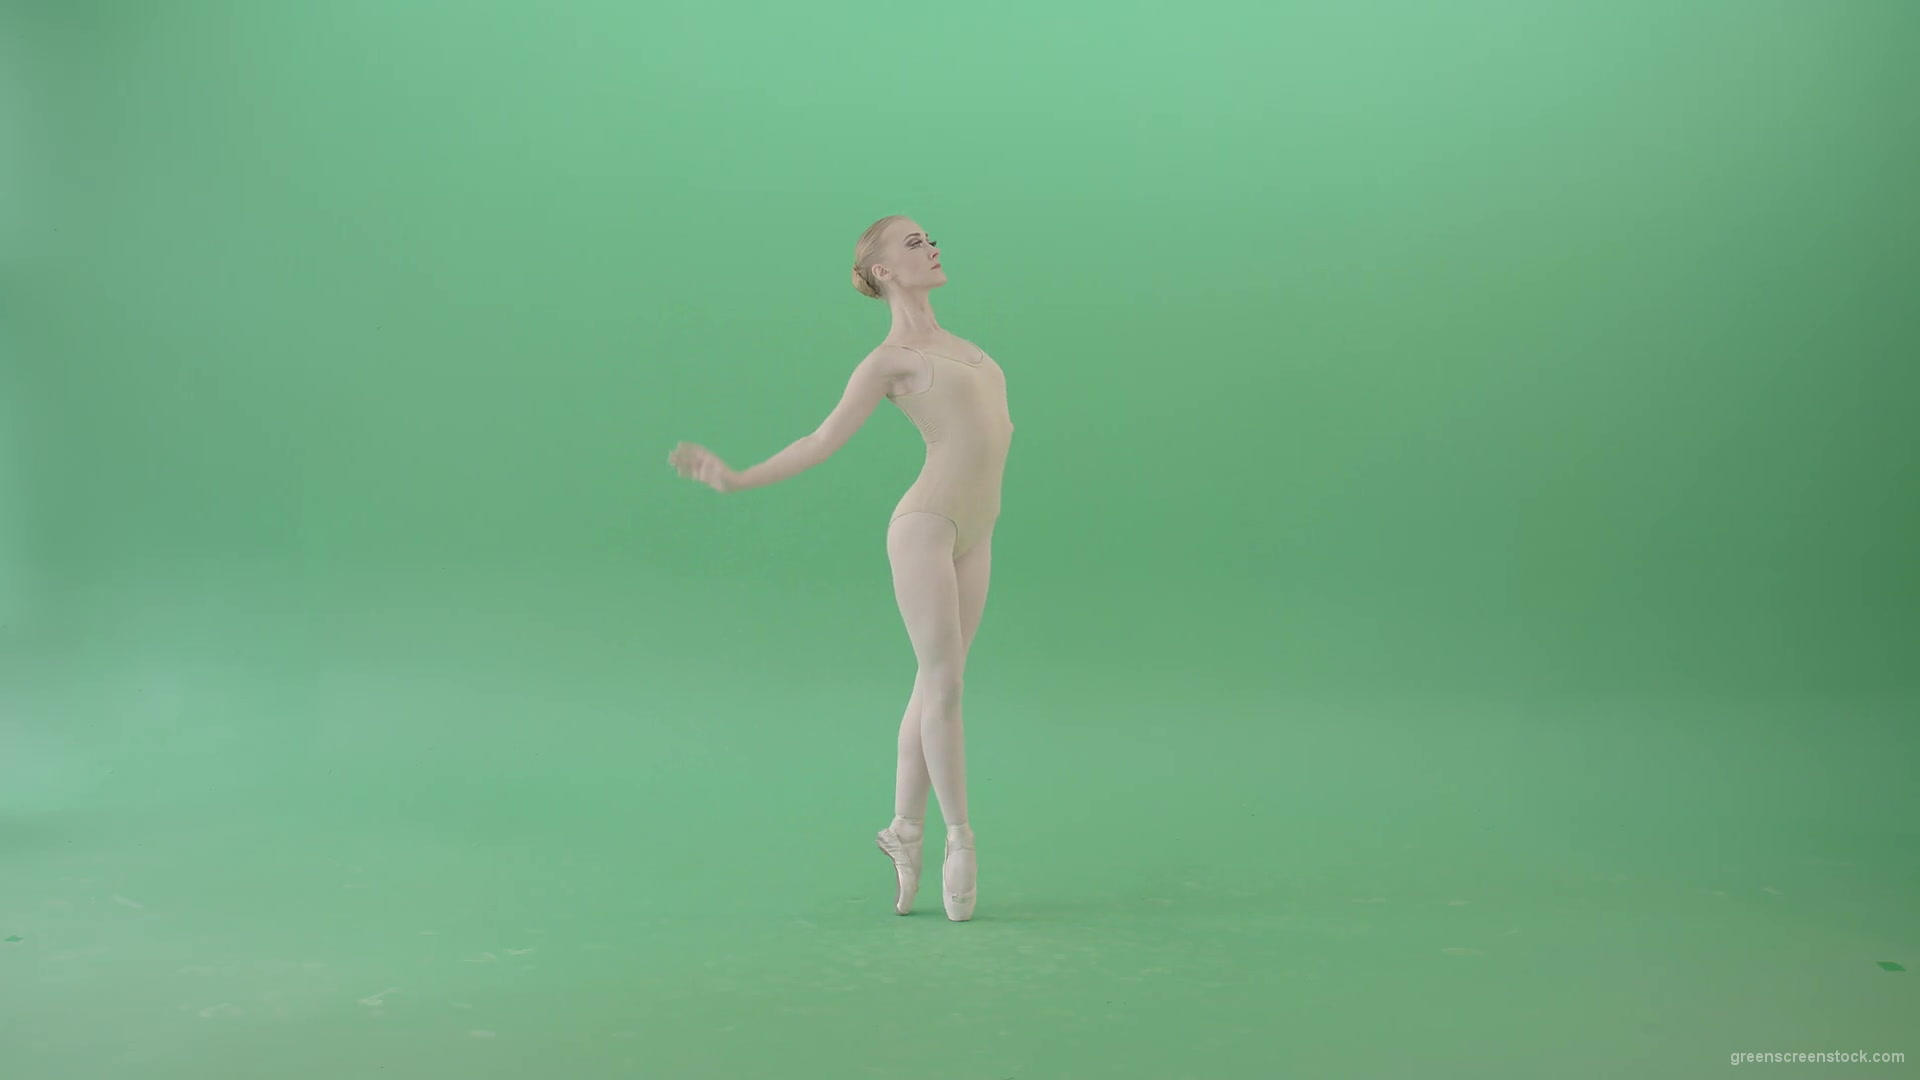 Classical-Ballet-Art-dancing-girl-in-body-skin-wear-chill-in-practice-isolated-on-green-screen-4K-Video-Footage-1920_002 Green Screen Stock